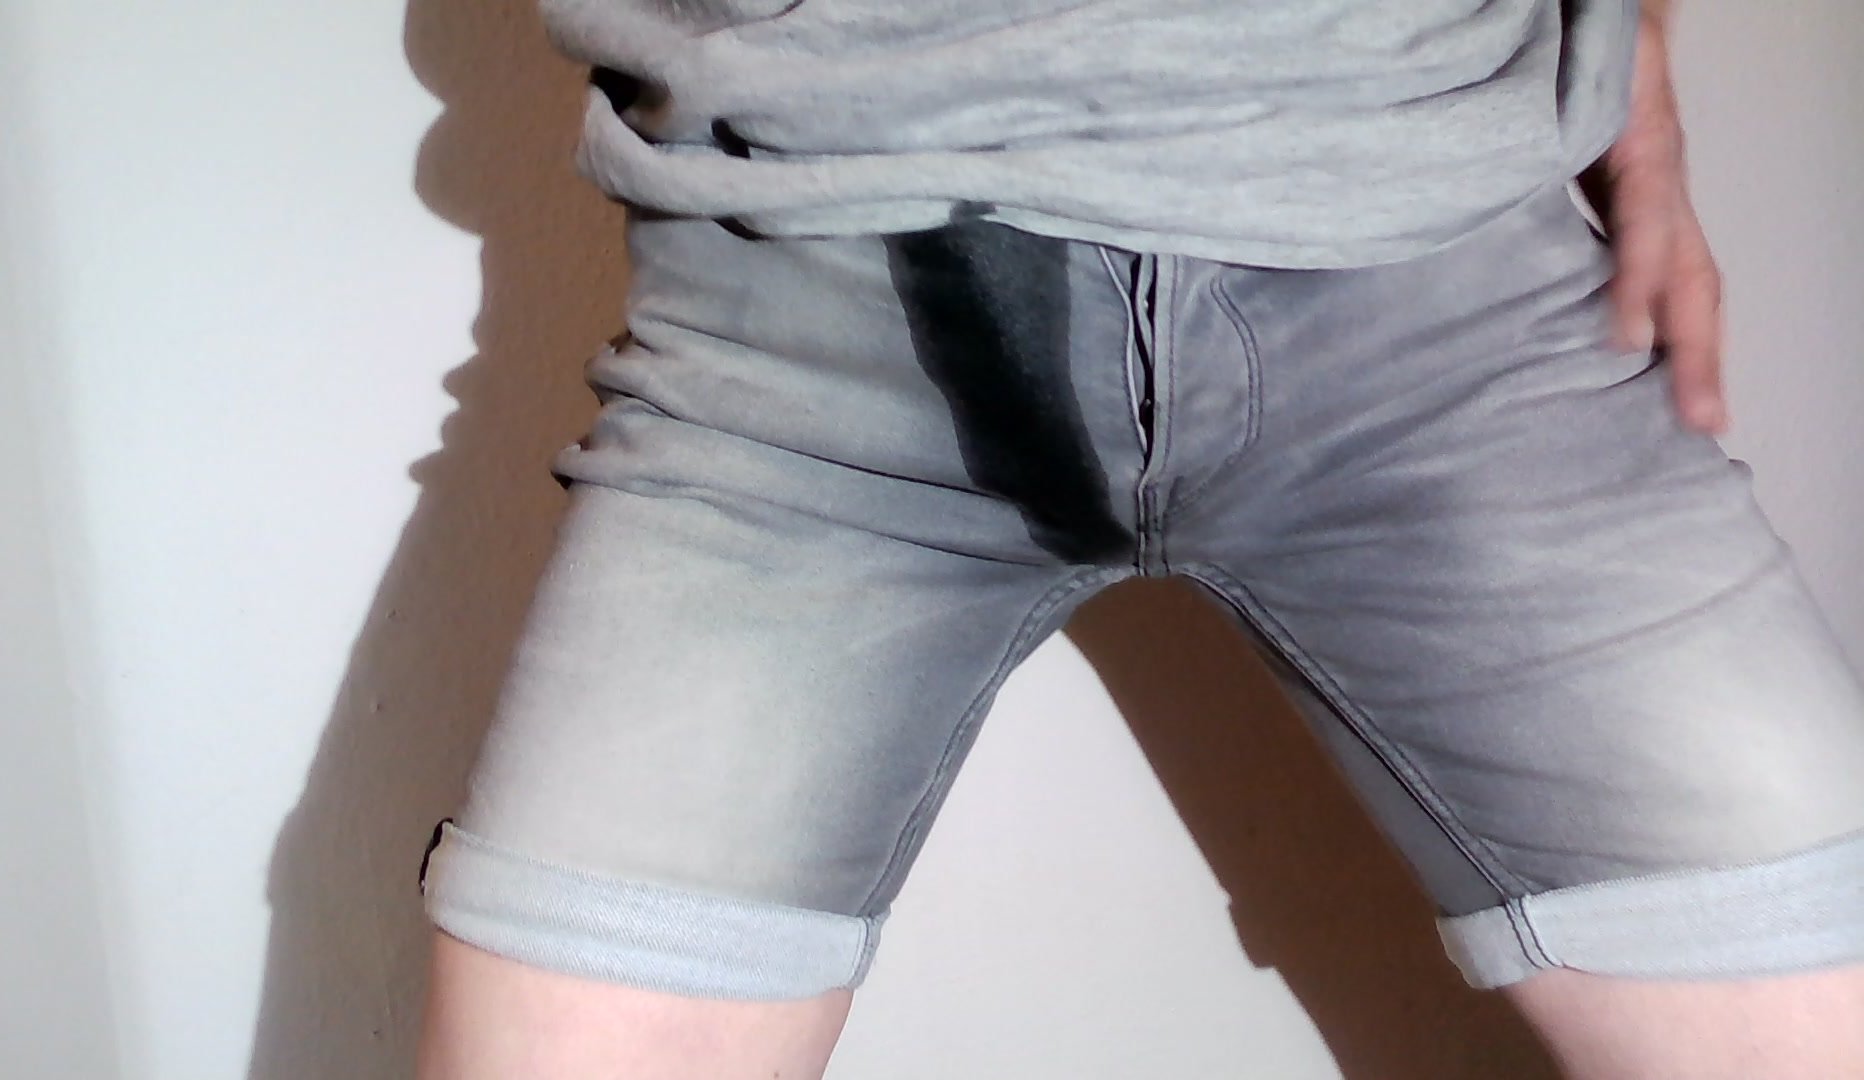 Pissing some tight and smooth J&J Shorts.